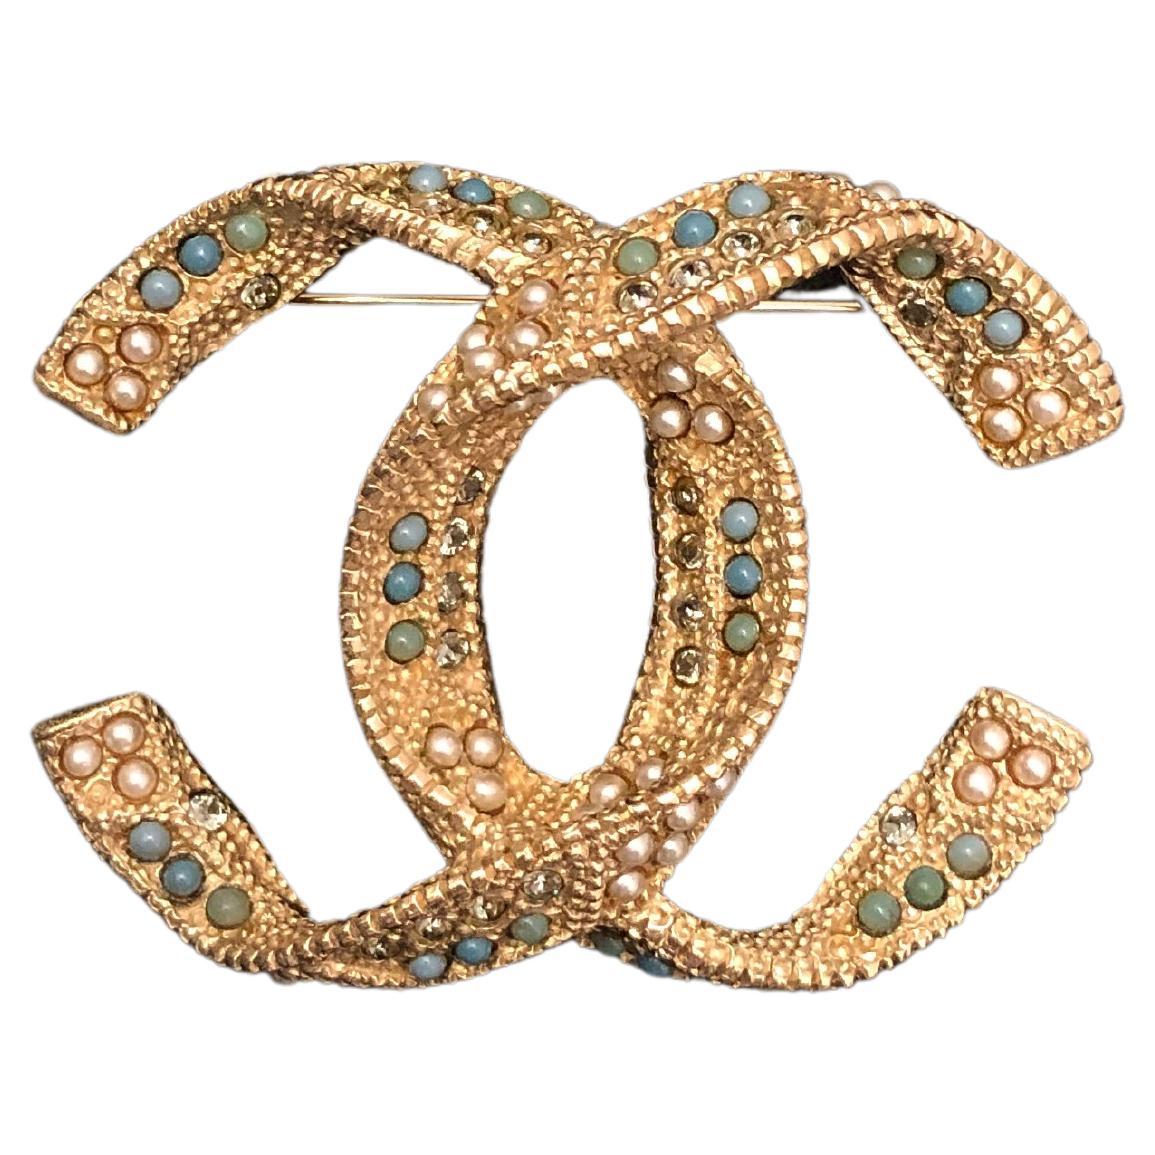 2015 CHANEL Gold Toned Faux Pearl Rhinestone CC Brooch For Sale